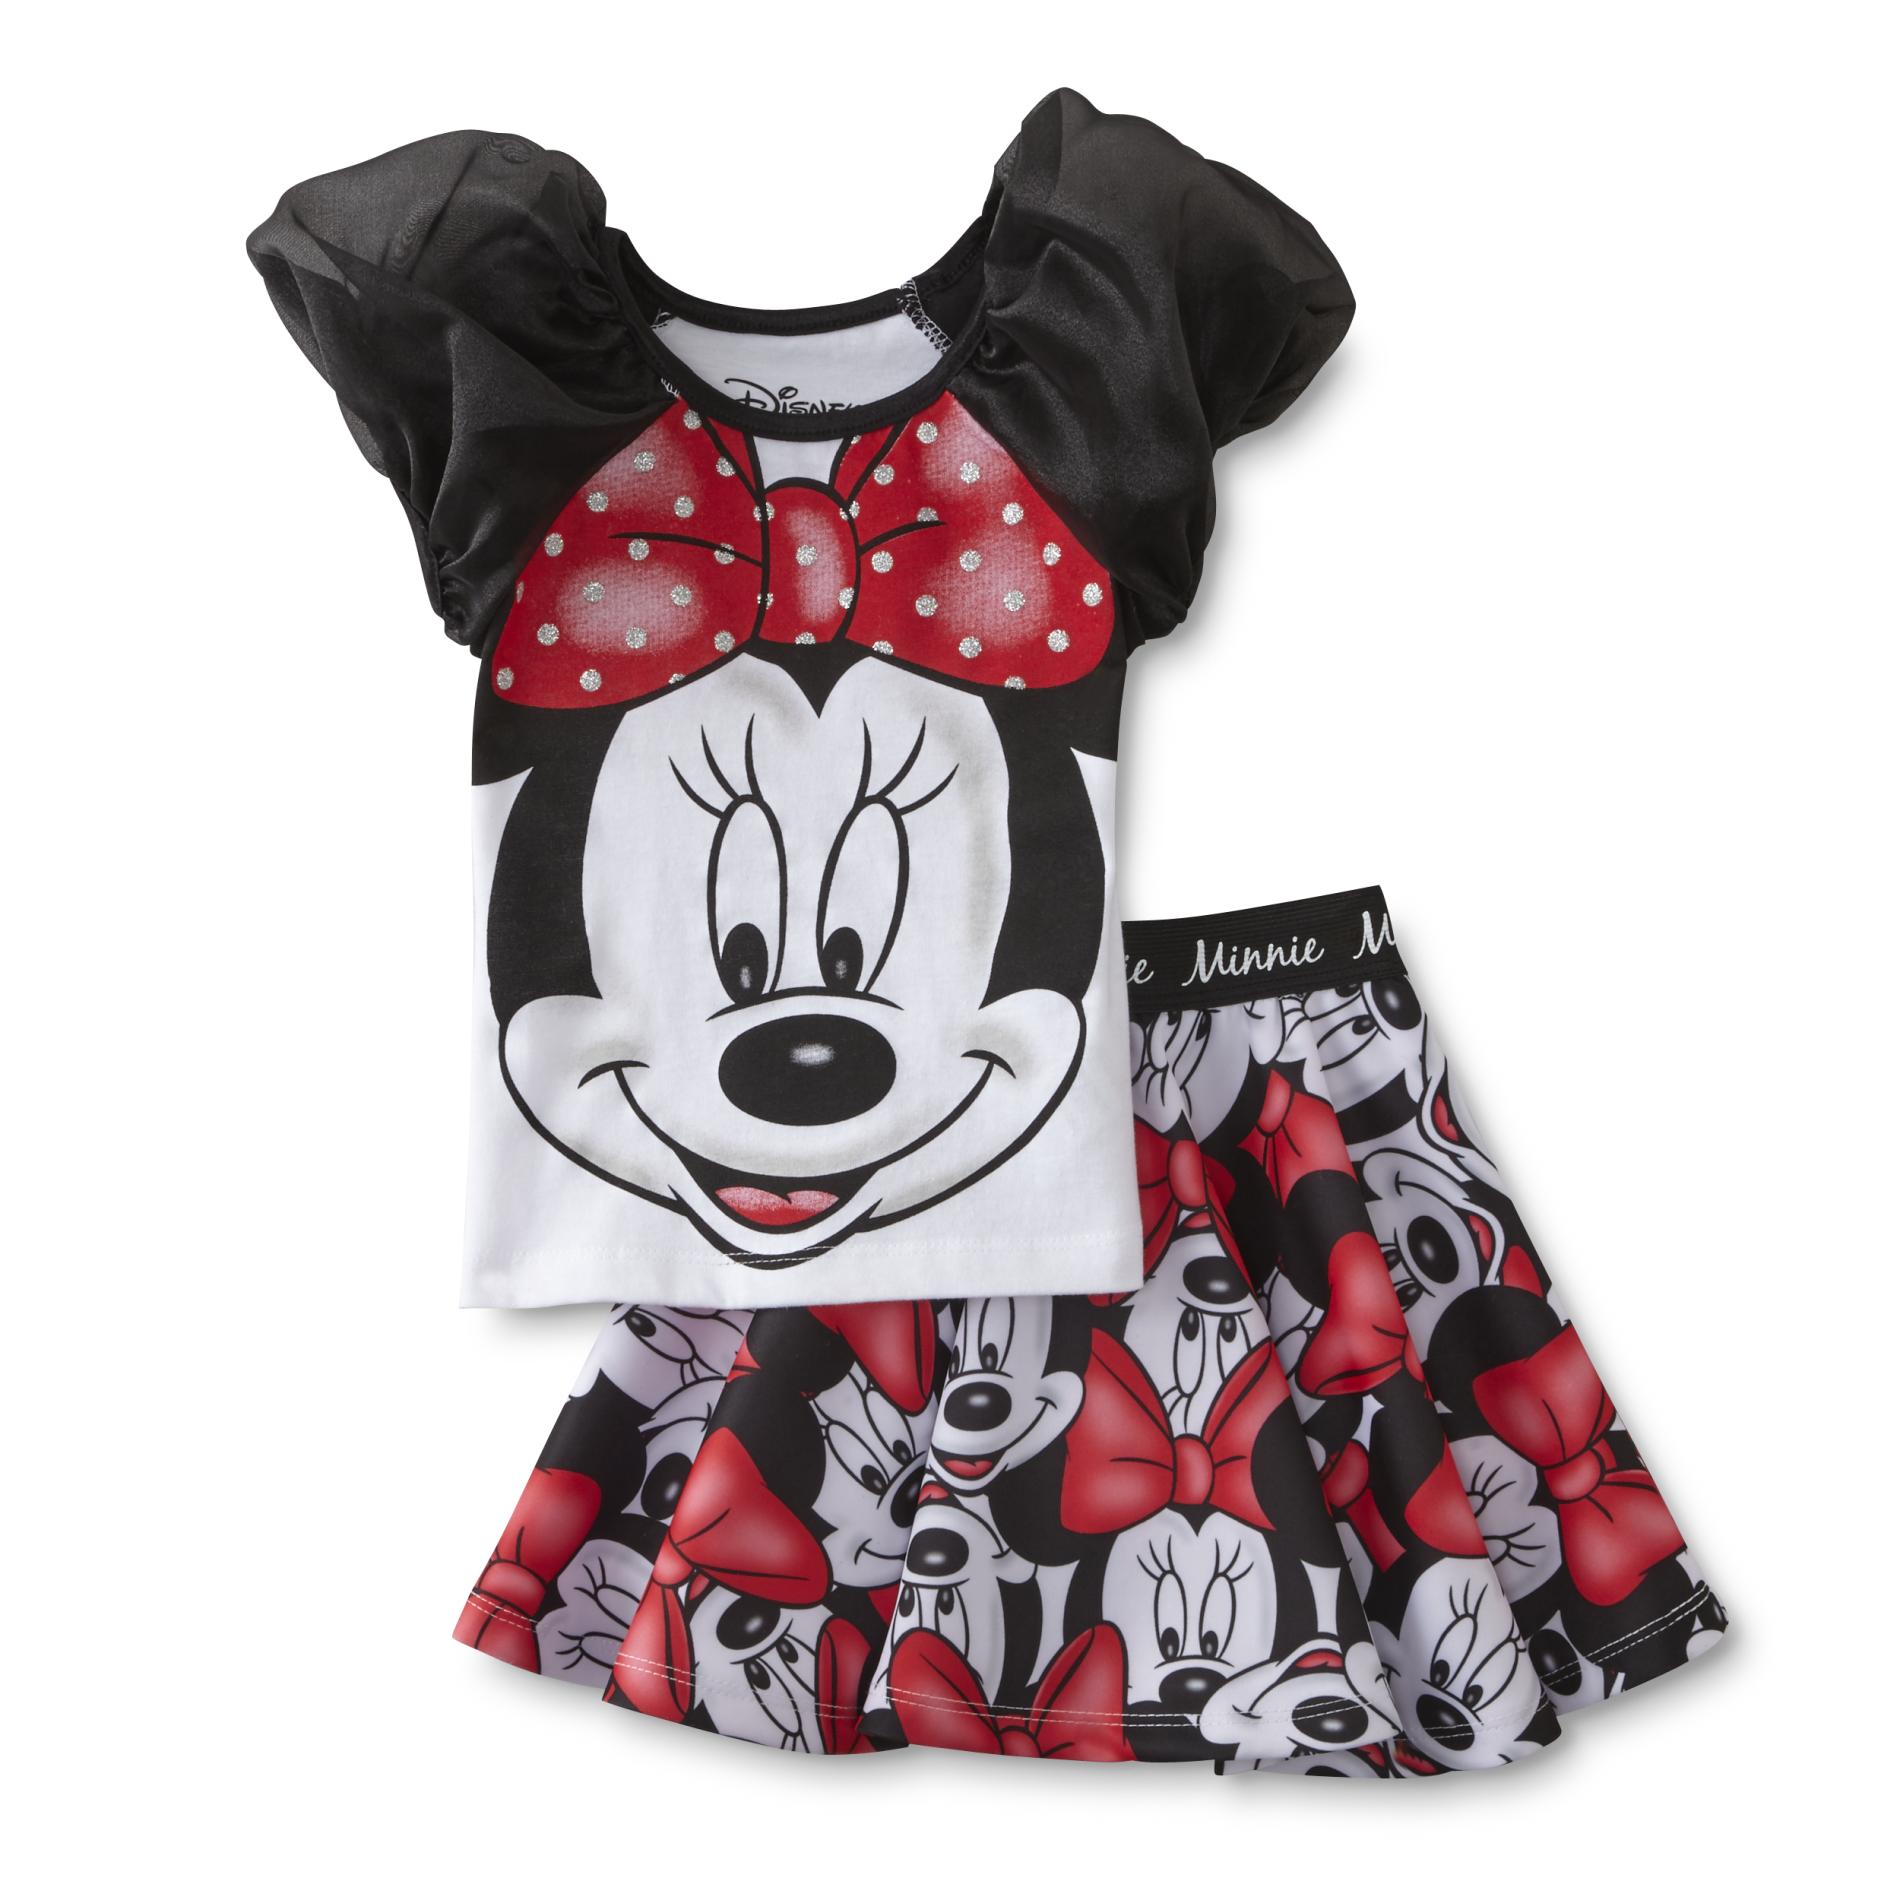 Disney Minnie Mouse Toddler Girl's Top & Skirt